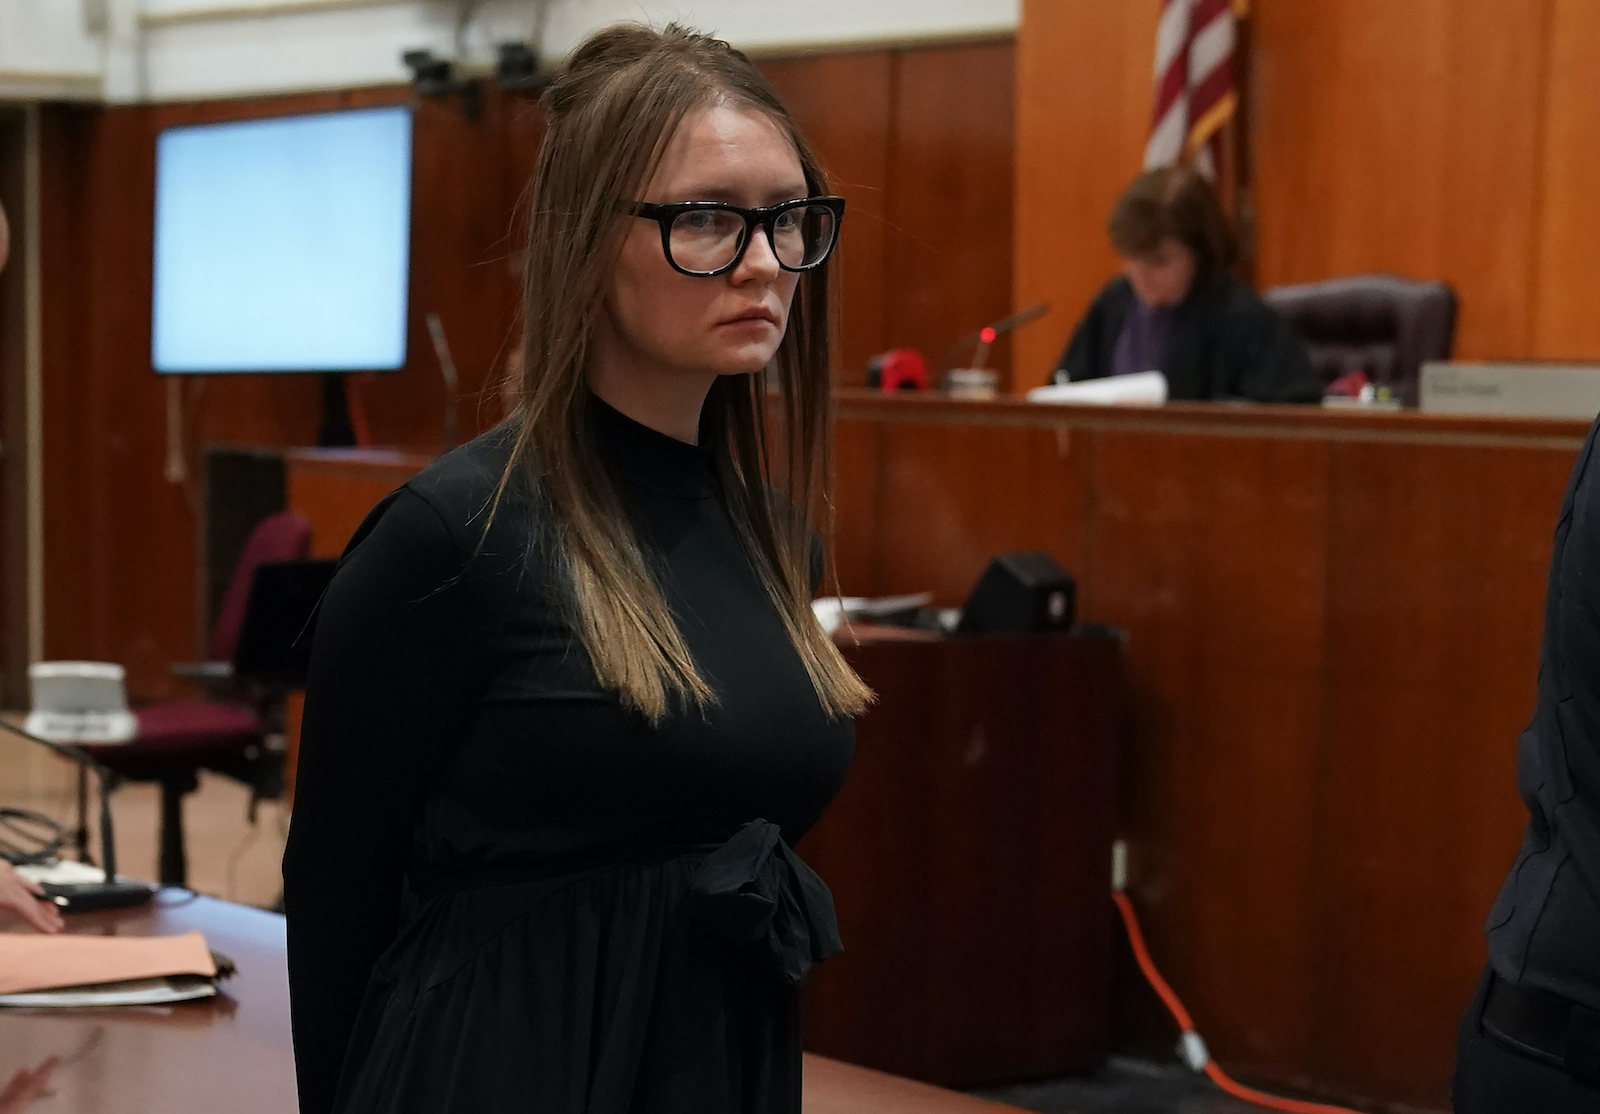 Anna Delvey (Sorokin) appears in court and is led away in handcuffs 